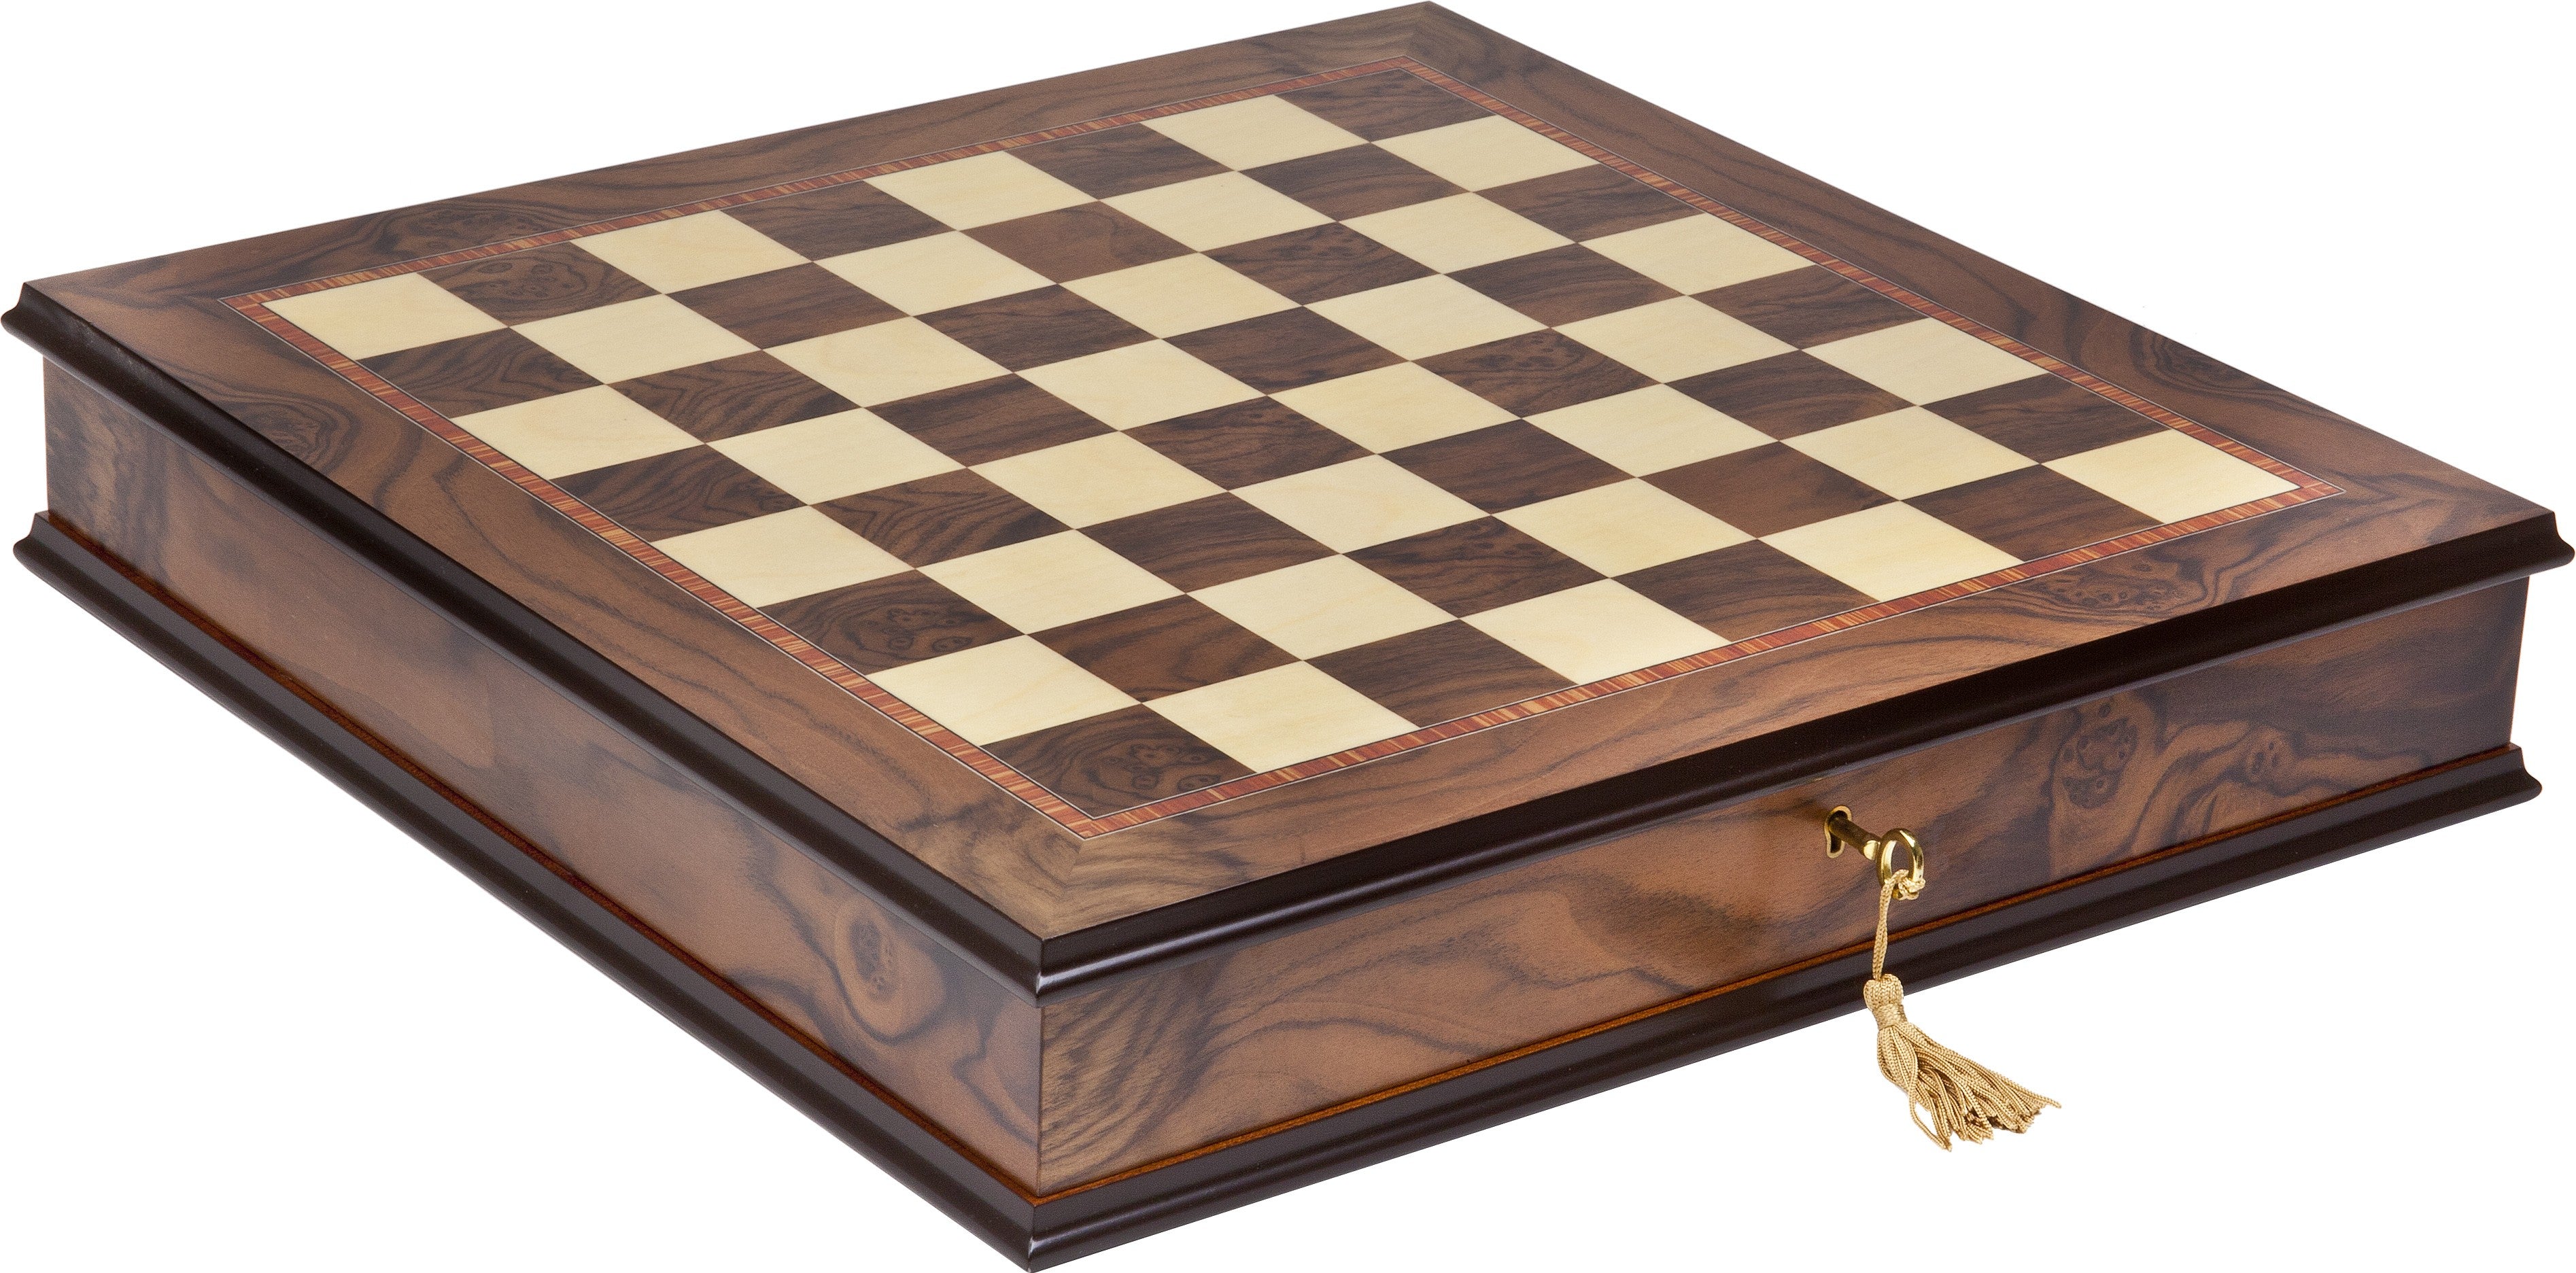 Chess Board Inlaid Wooden Flat Board Game Mahogany & Maple 